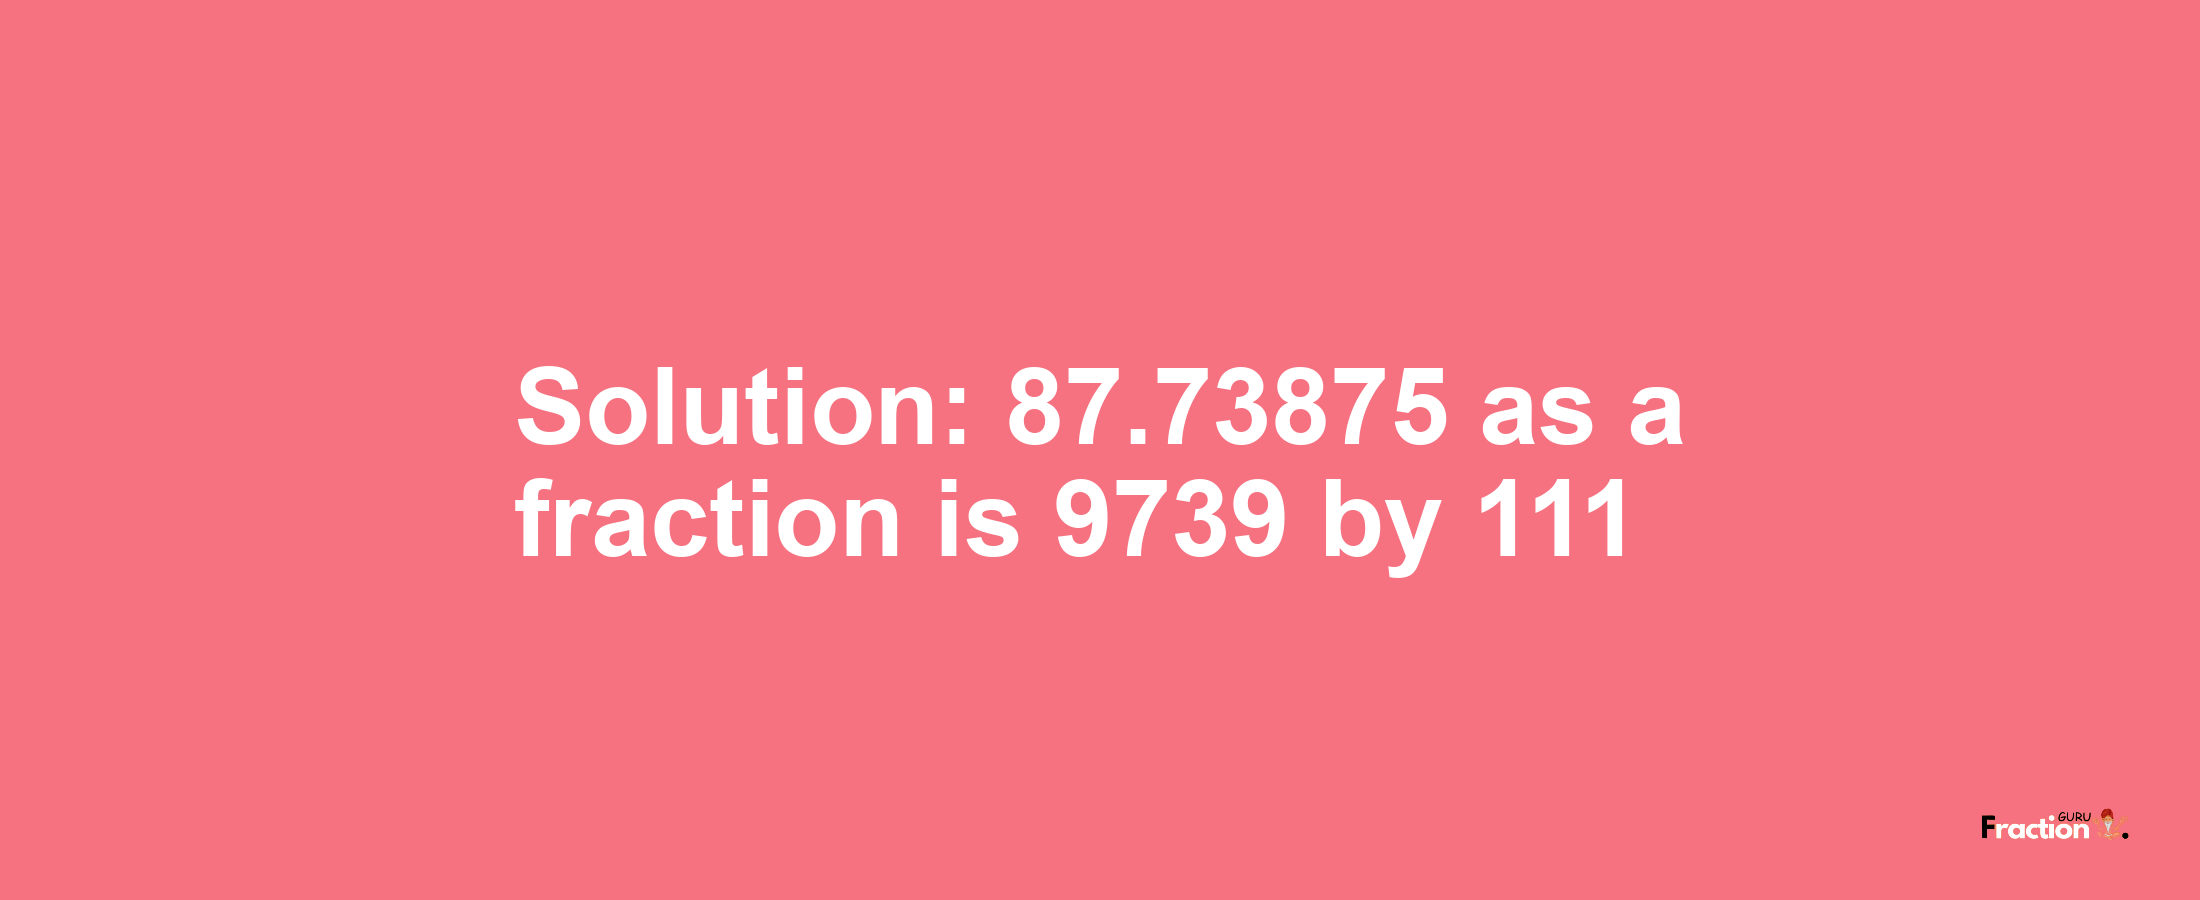 Solution:87.73875 as a fraction is 9739/111